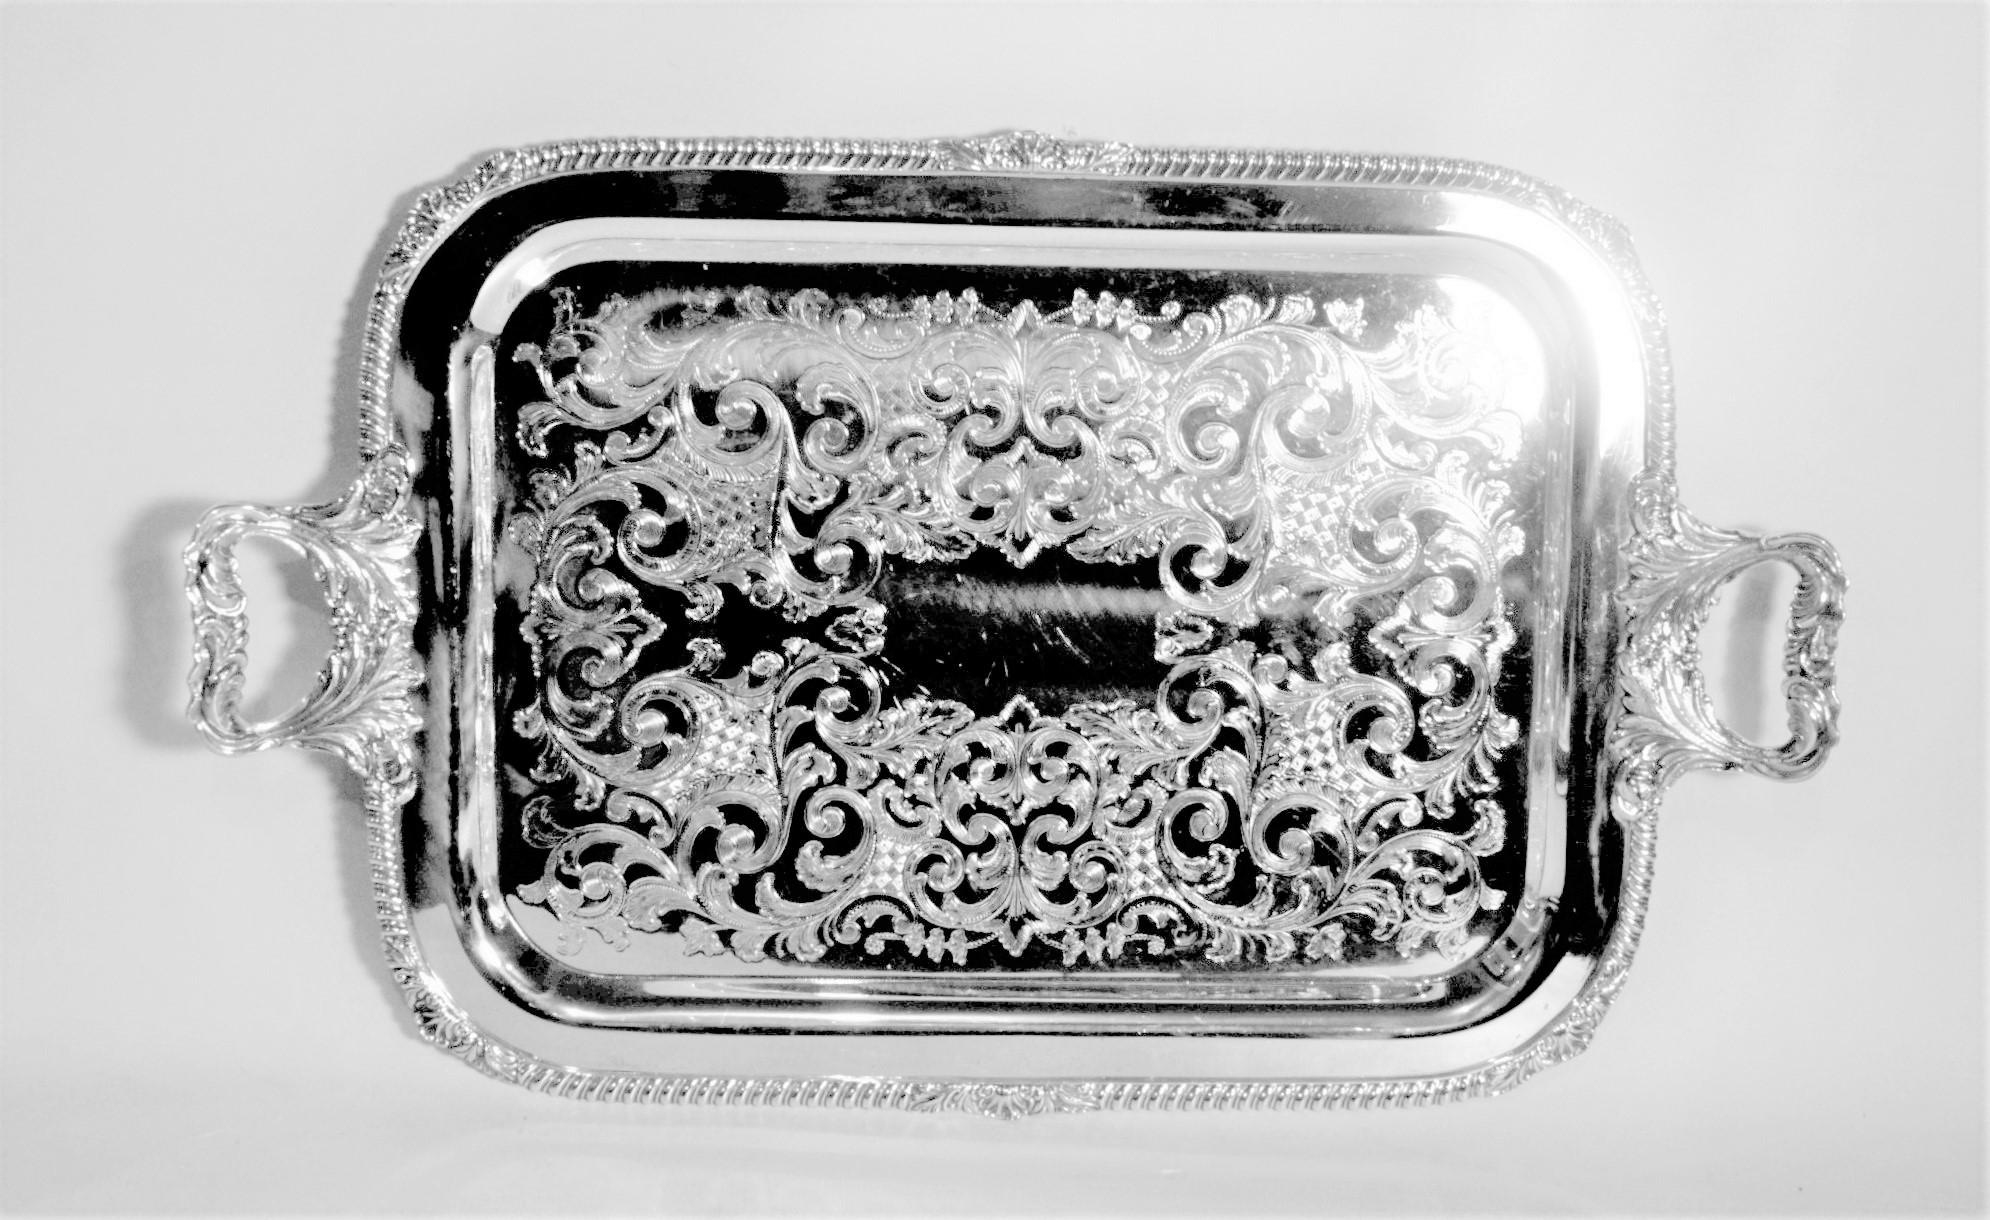 Victorian Small Antique Styled English Silver Plated Serving Tray with Ornate Engraving For Sale